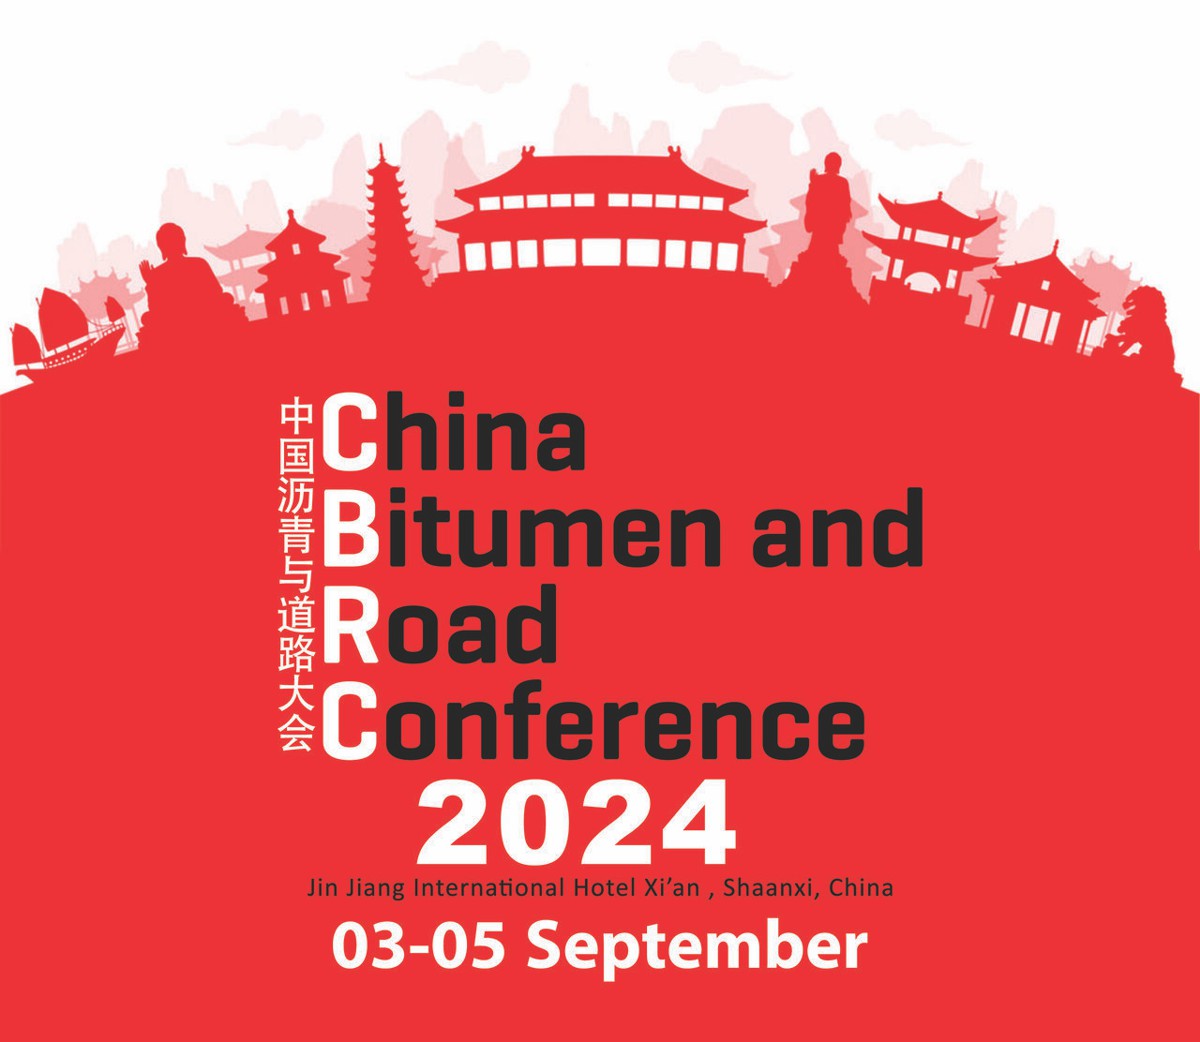 East meets West at China Bitumen and Road Conference 2024